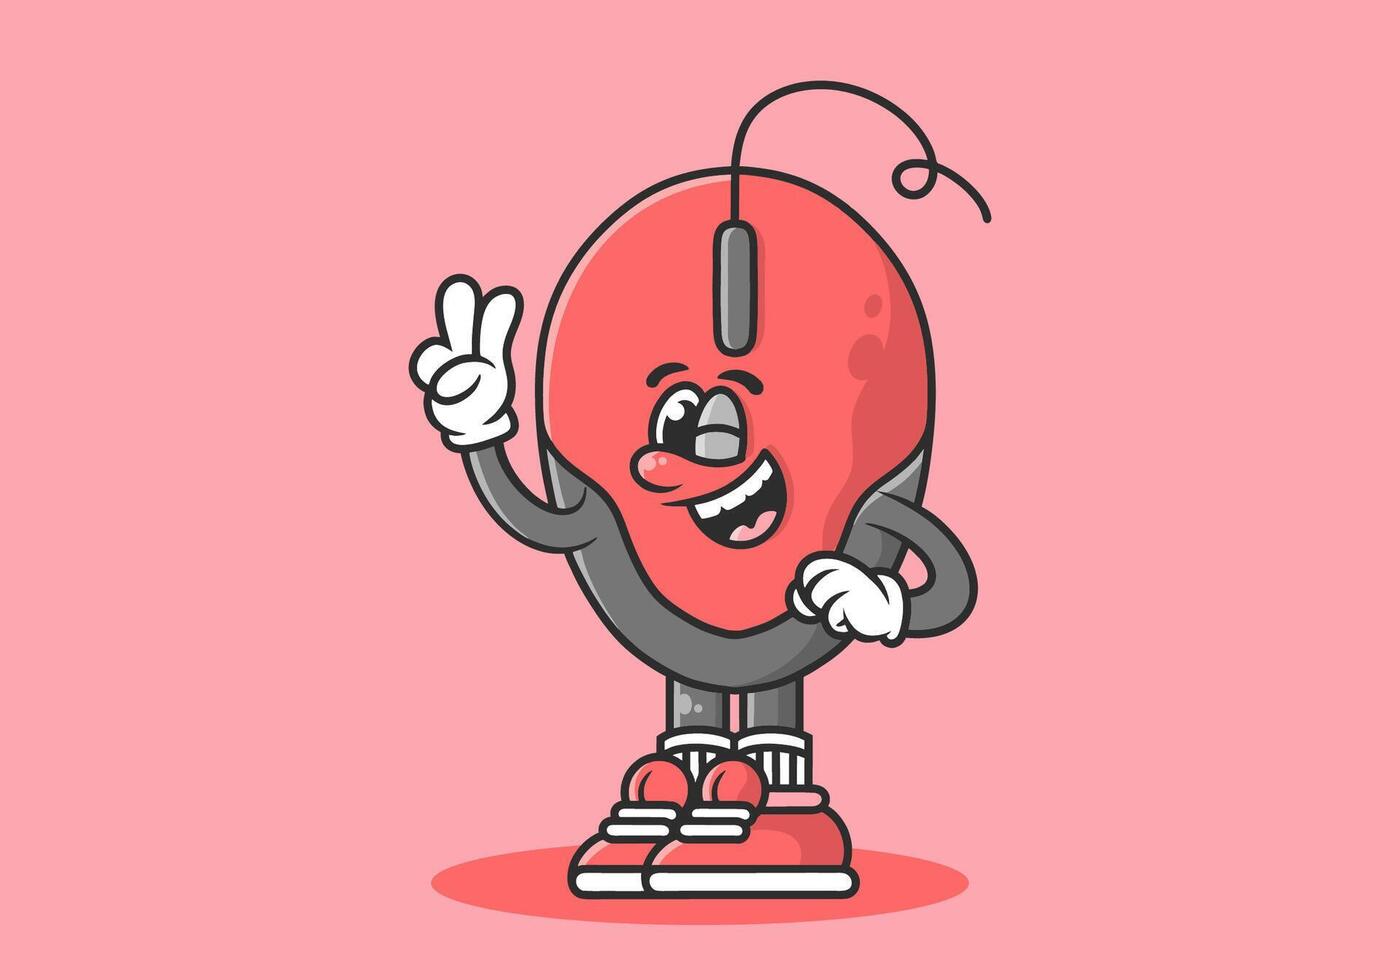 Character illustration of a computer mouse with hands forming a symbol of peace. Red colors vector